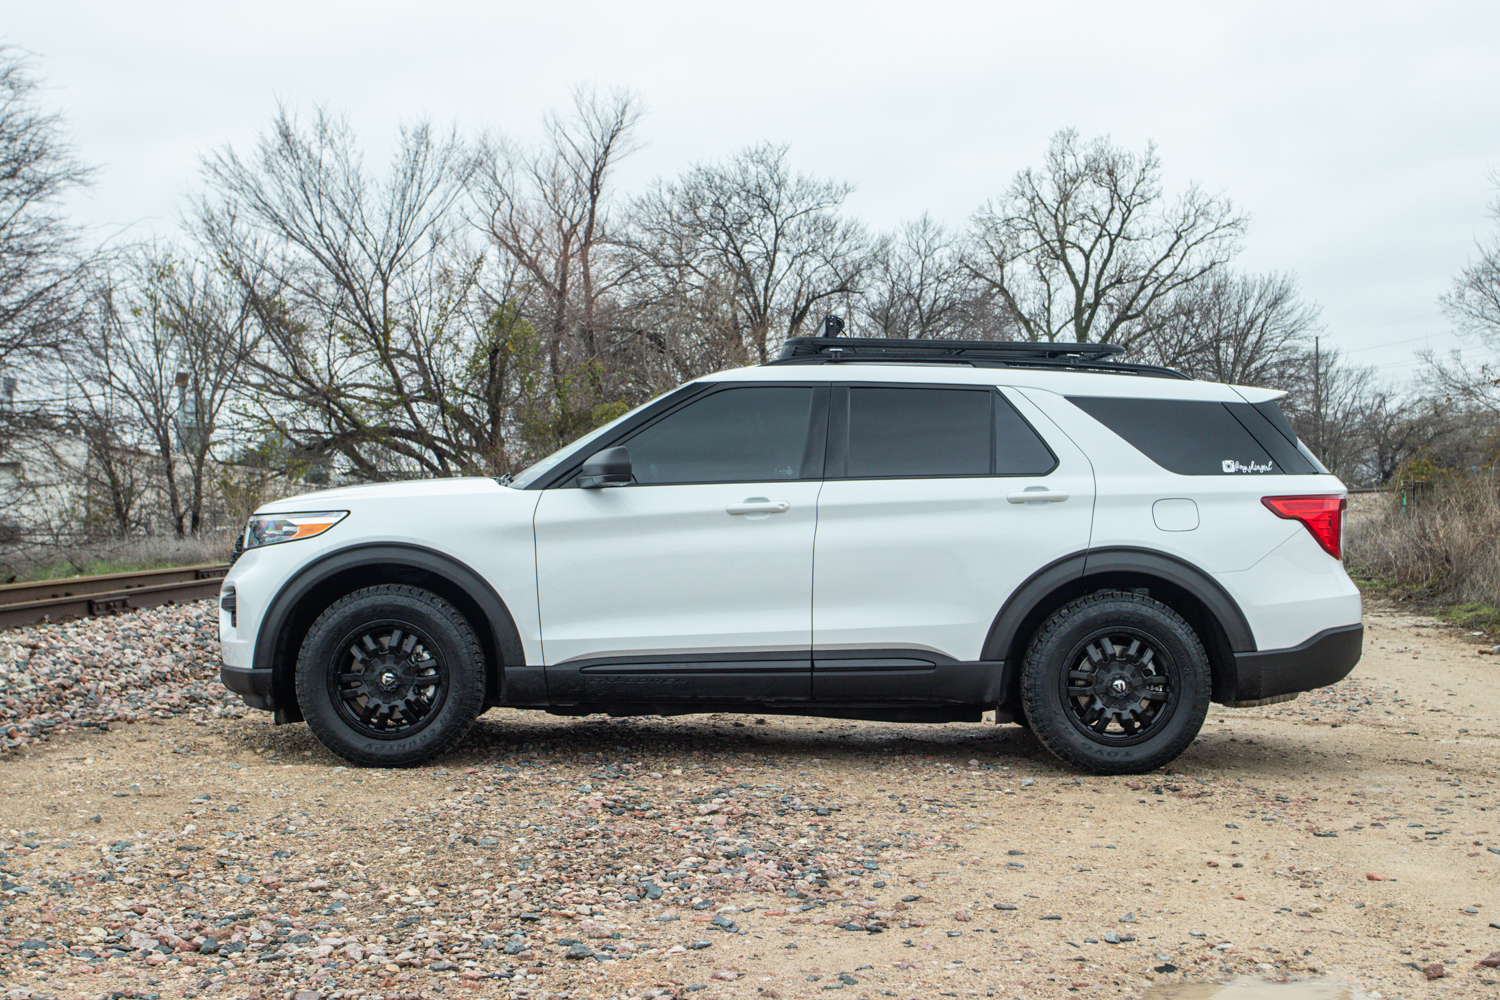 Ford Explorer Off Road Build With Fuel Sledge Wheels